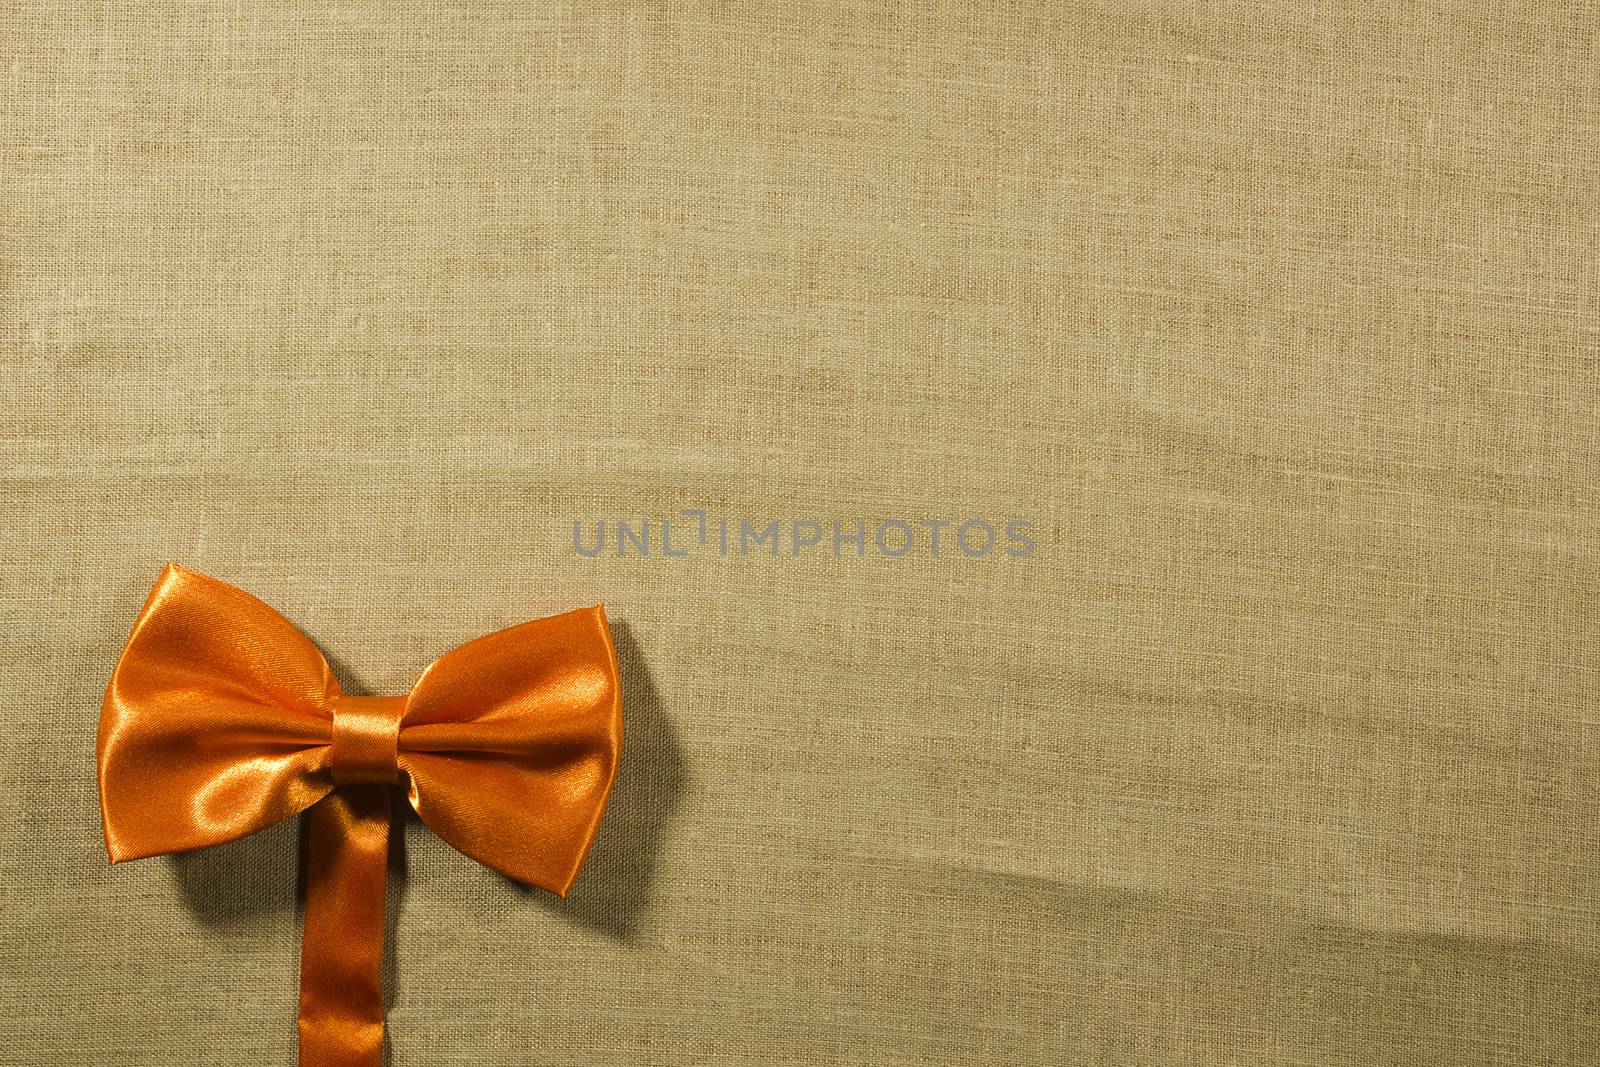 Bow tie on a background of white linen napkins